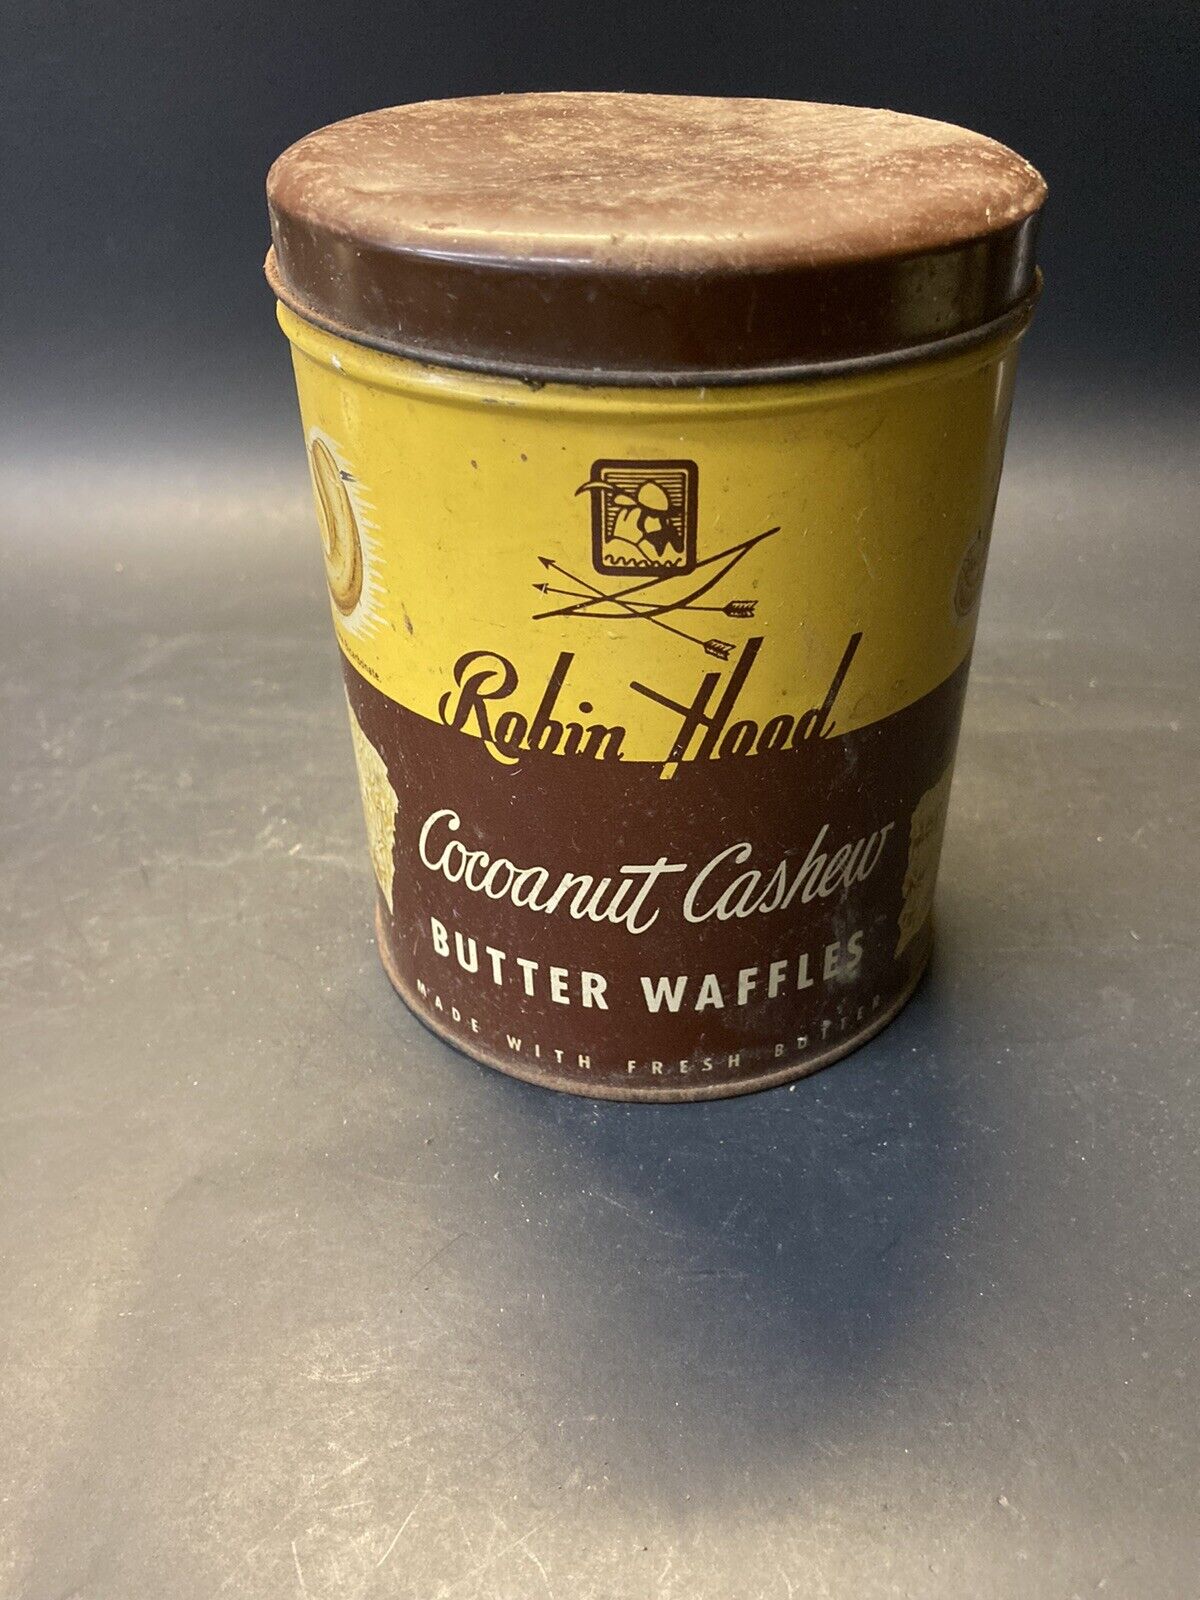 Vintage 1950s Robin Hood Coconut Cashews Butter Waffles Advertising Tin Can 